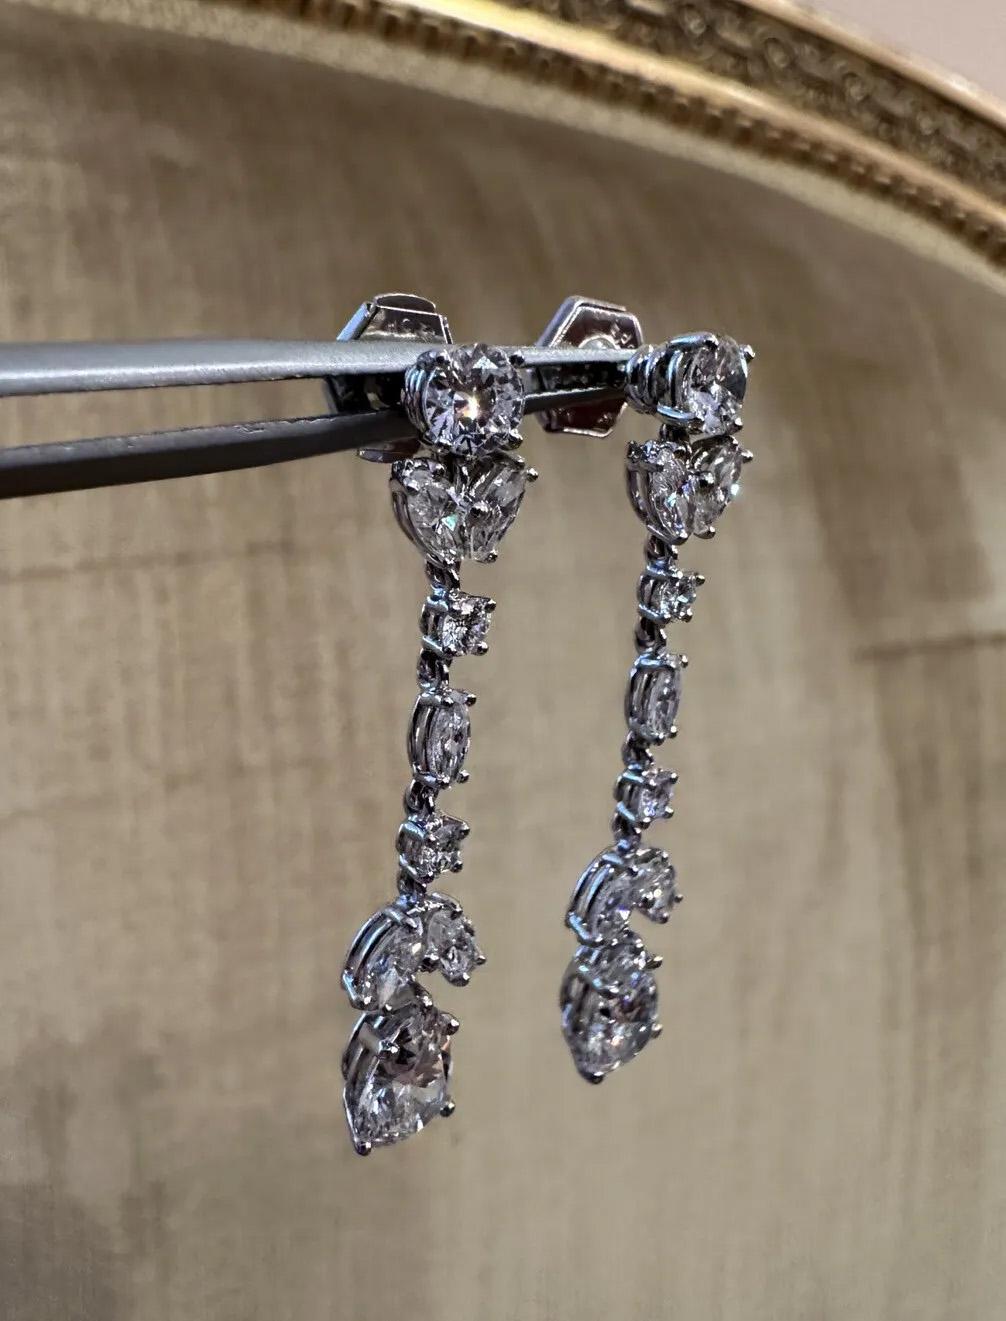 Long Diamond Drop Earrings with Pear Shapes in 18k White Gold & Platinum In Excellent Condition For Sale In La Jolla, CA